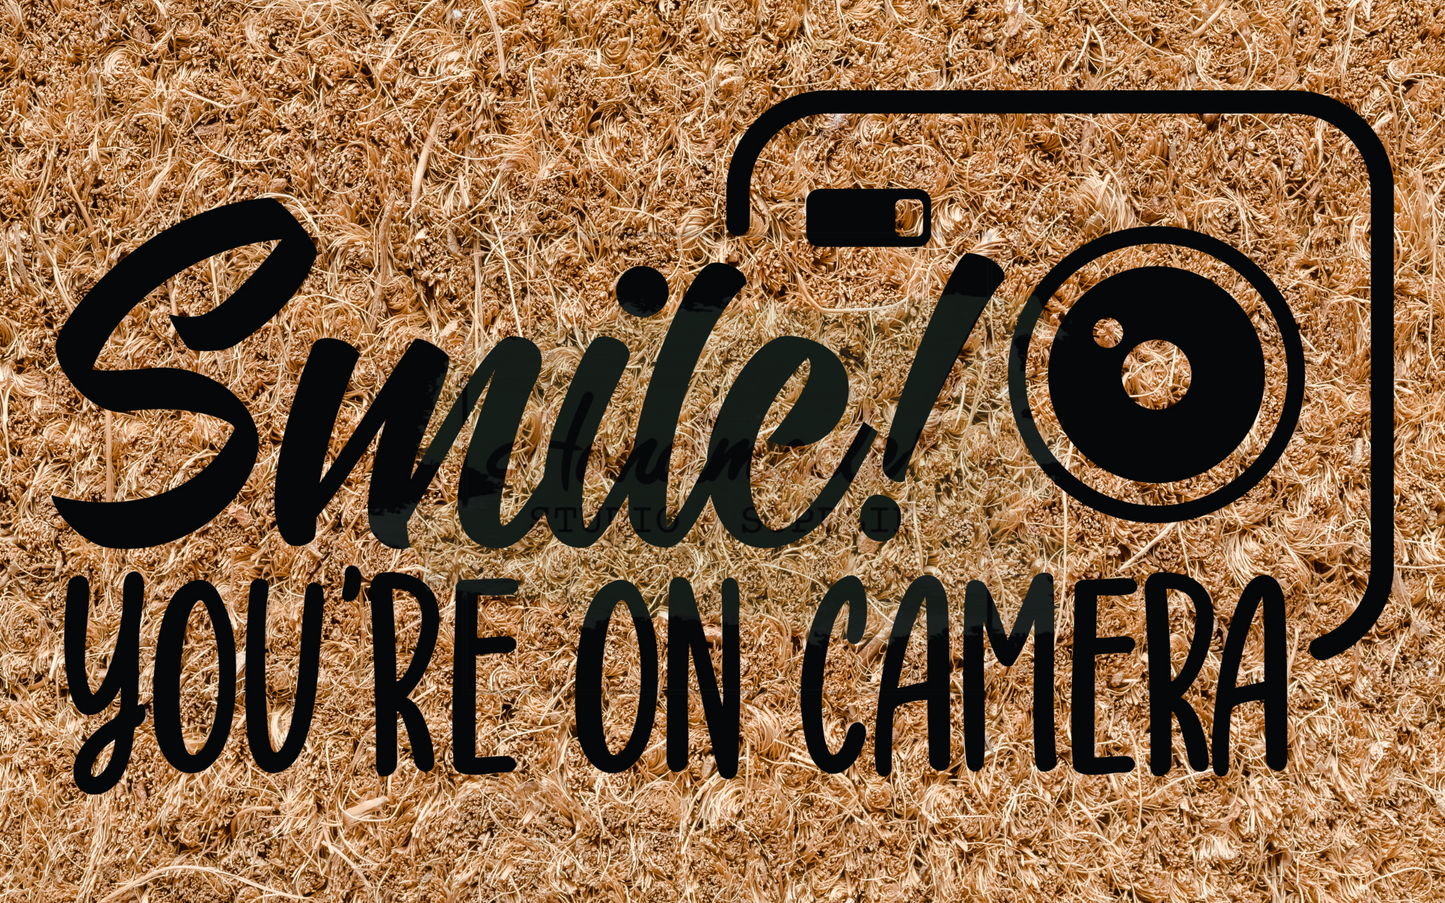 Smile you're on camera - camera